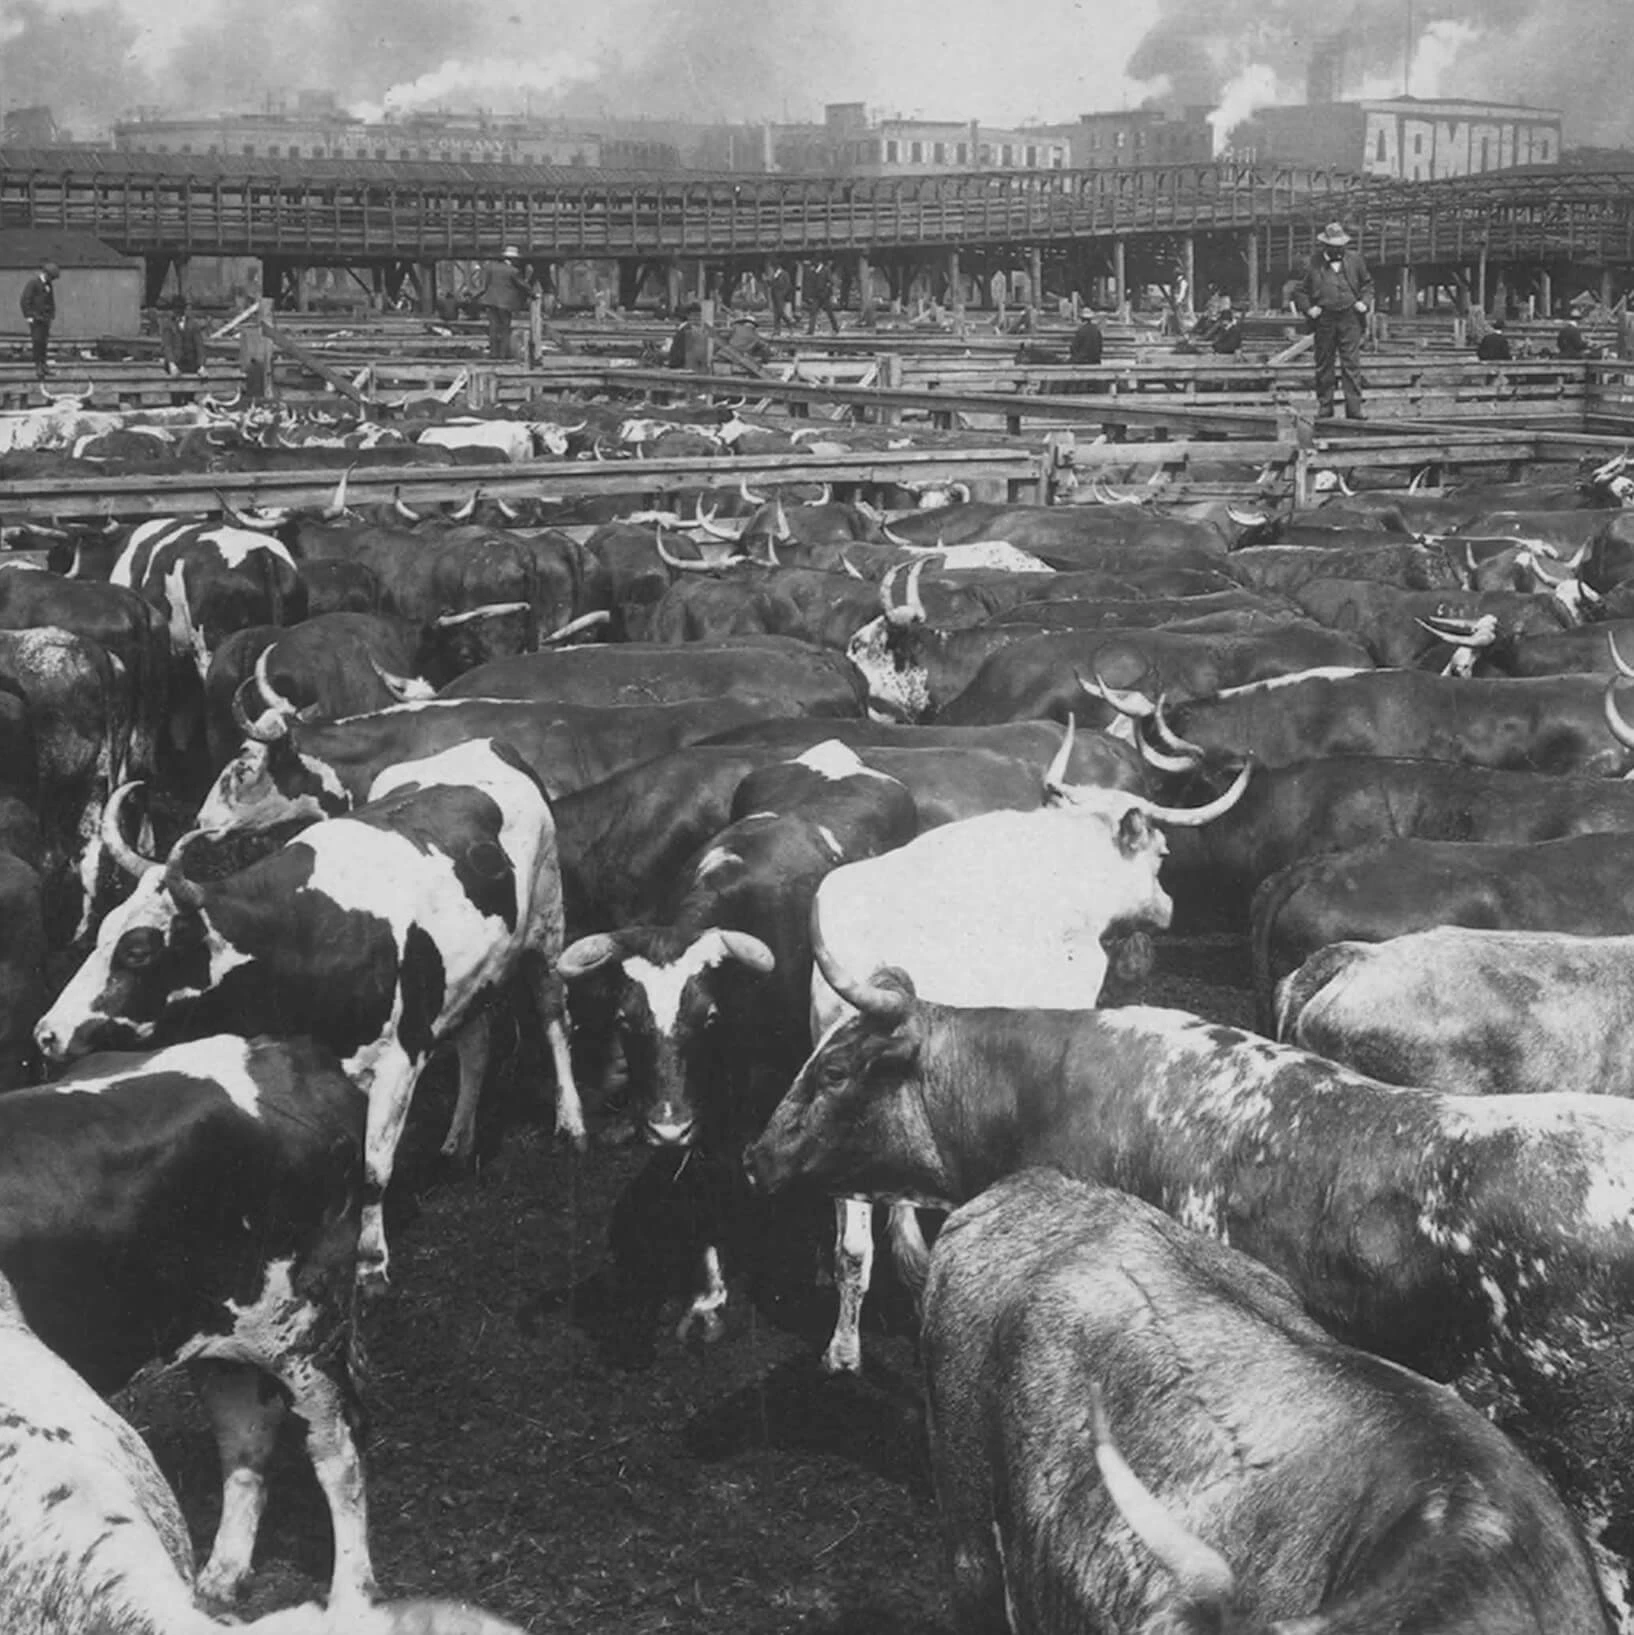 Cows are standing in a series of corrals with a man standing on the fence posts. Buildings and smokestacks are in the background.